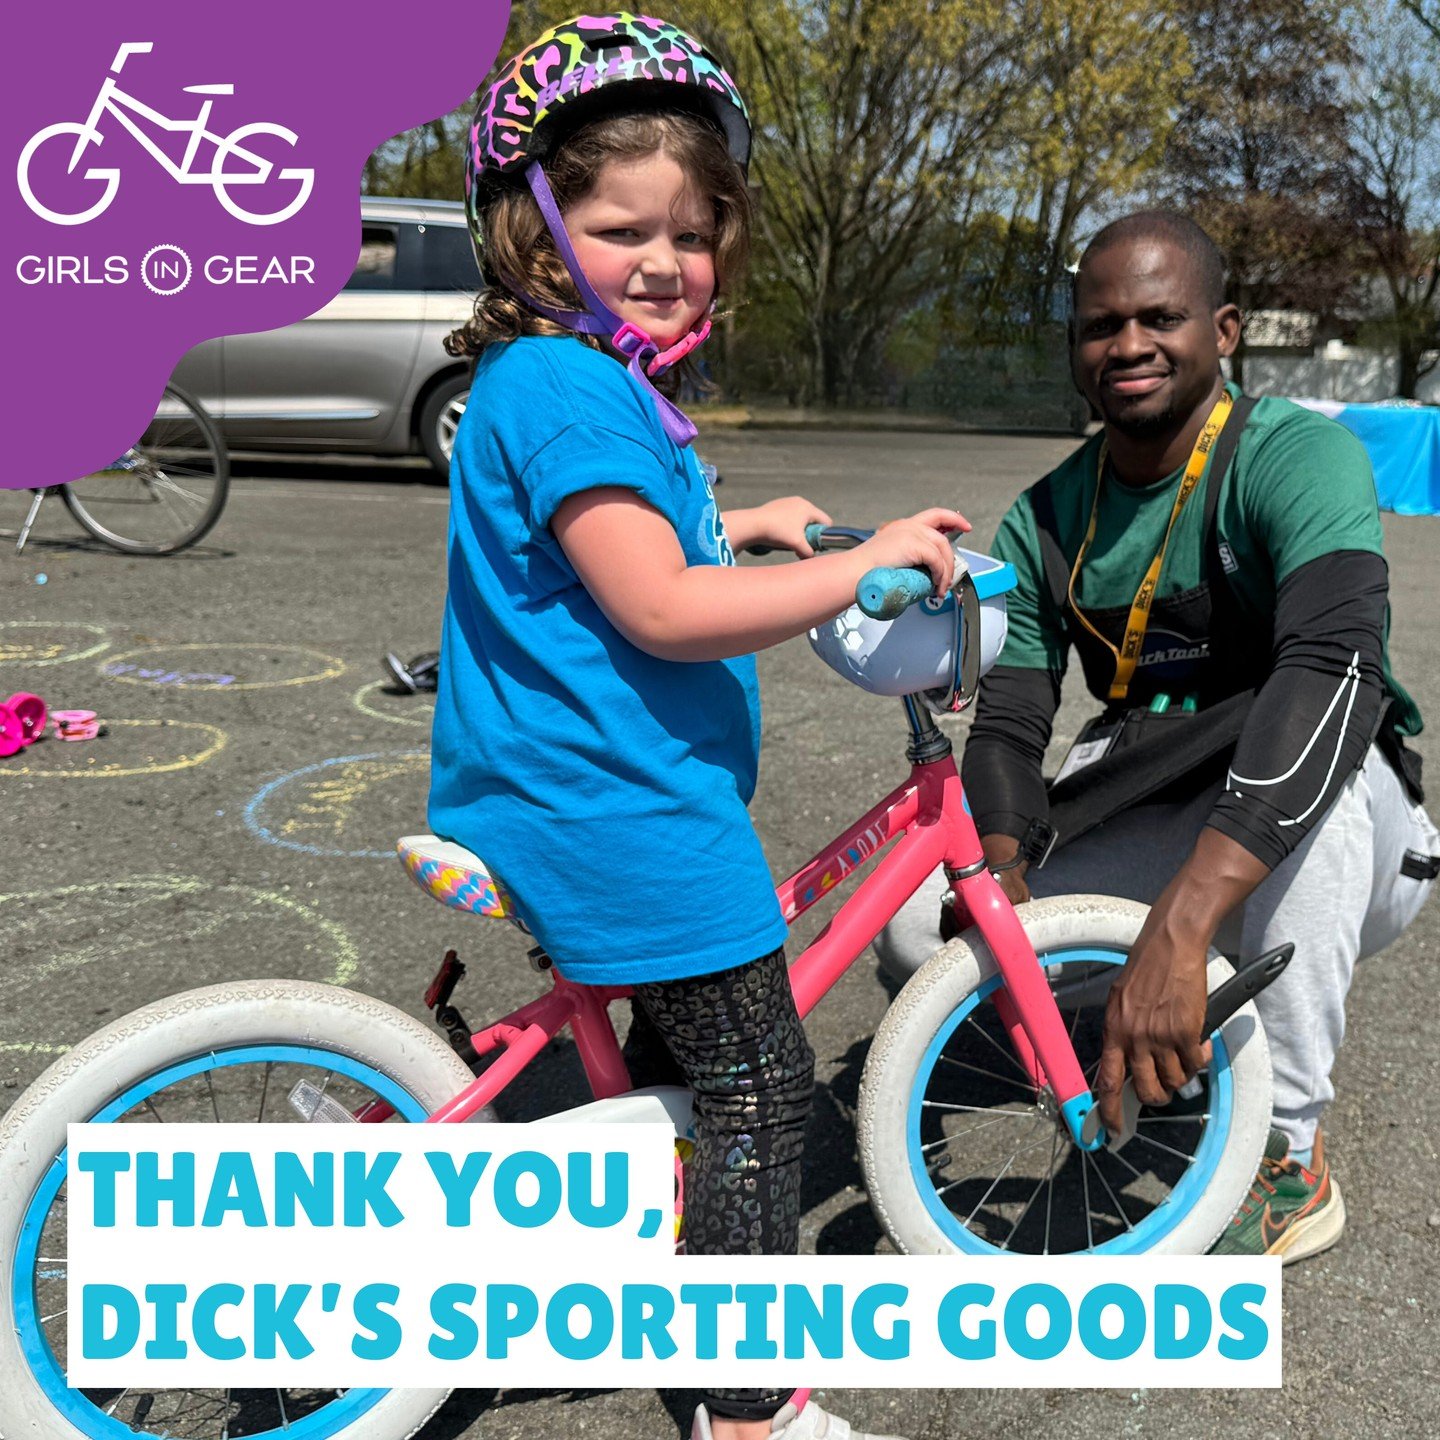 Thank you to @dickssportinggoods for helping us go the extra mile. Your support is gearing us up for success!